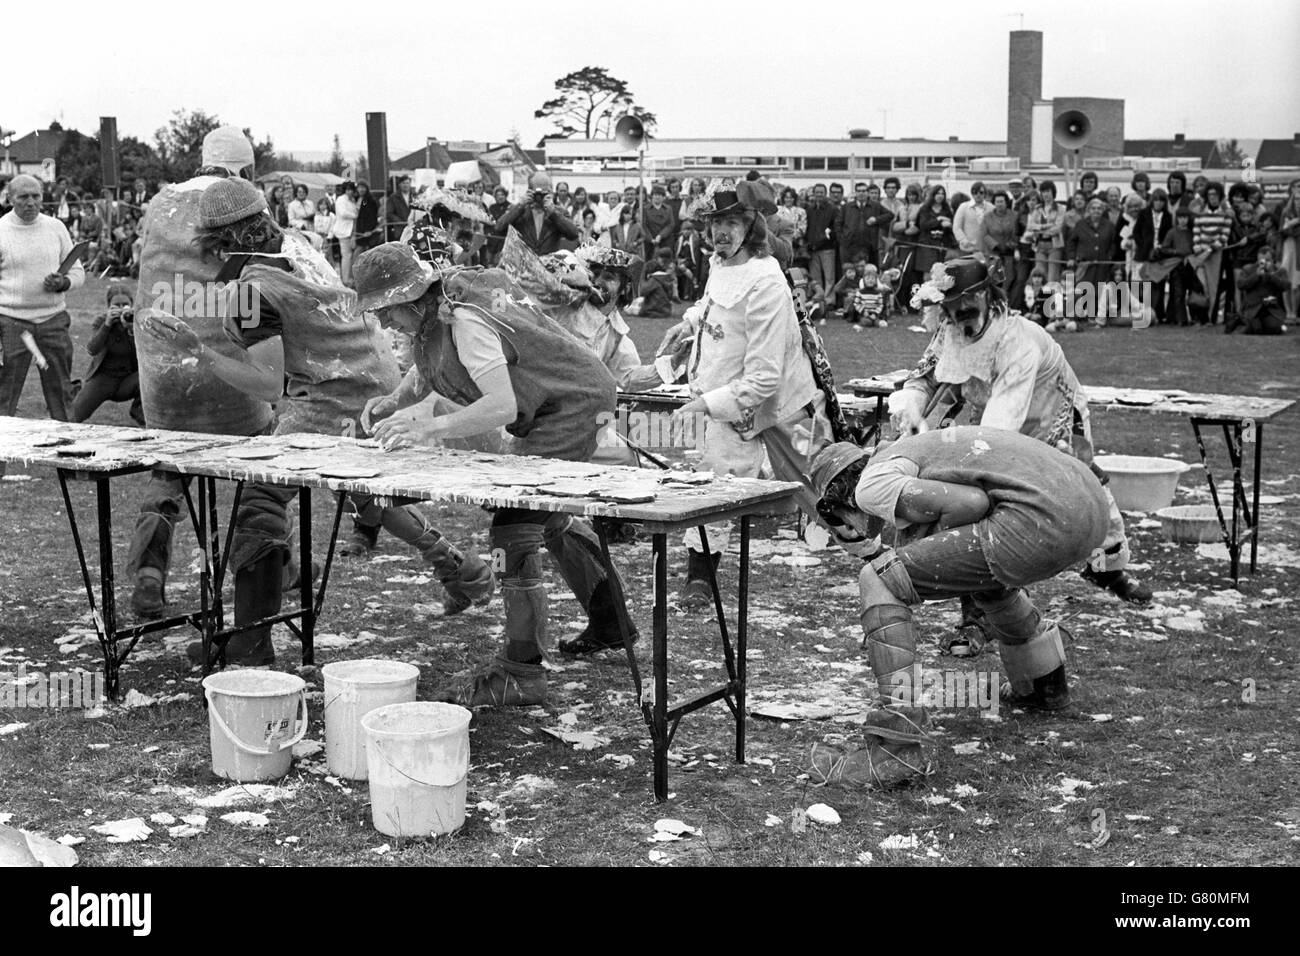 Pie throwing in earnest during the Ninth World Custard Pie Championships, held at the Coxheath Fete. The object of the championships is to land more flour and water missiles on target than their competitors. The event was won by The Hadlow Haystackers. Stock Photo